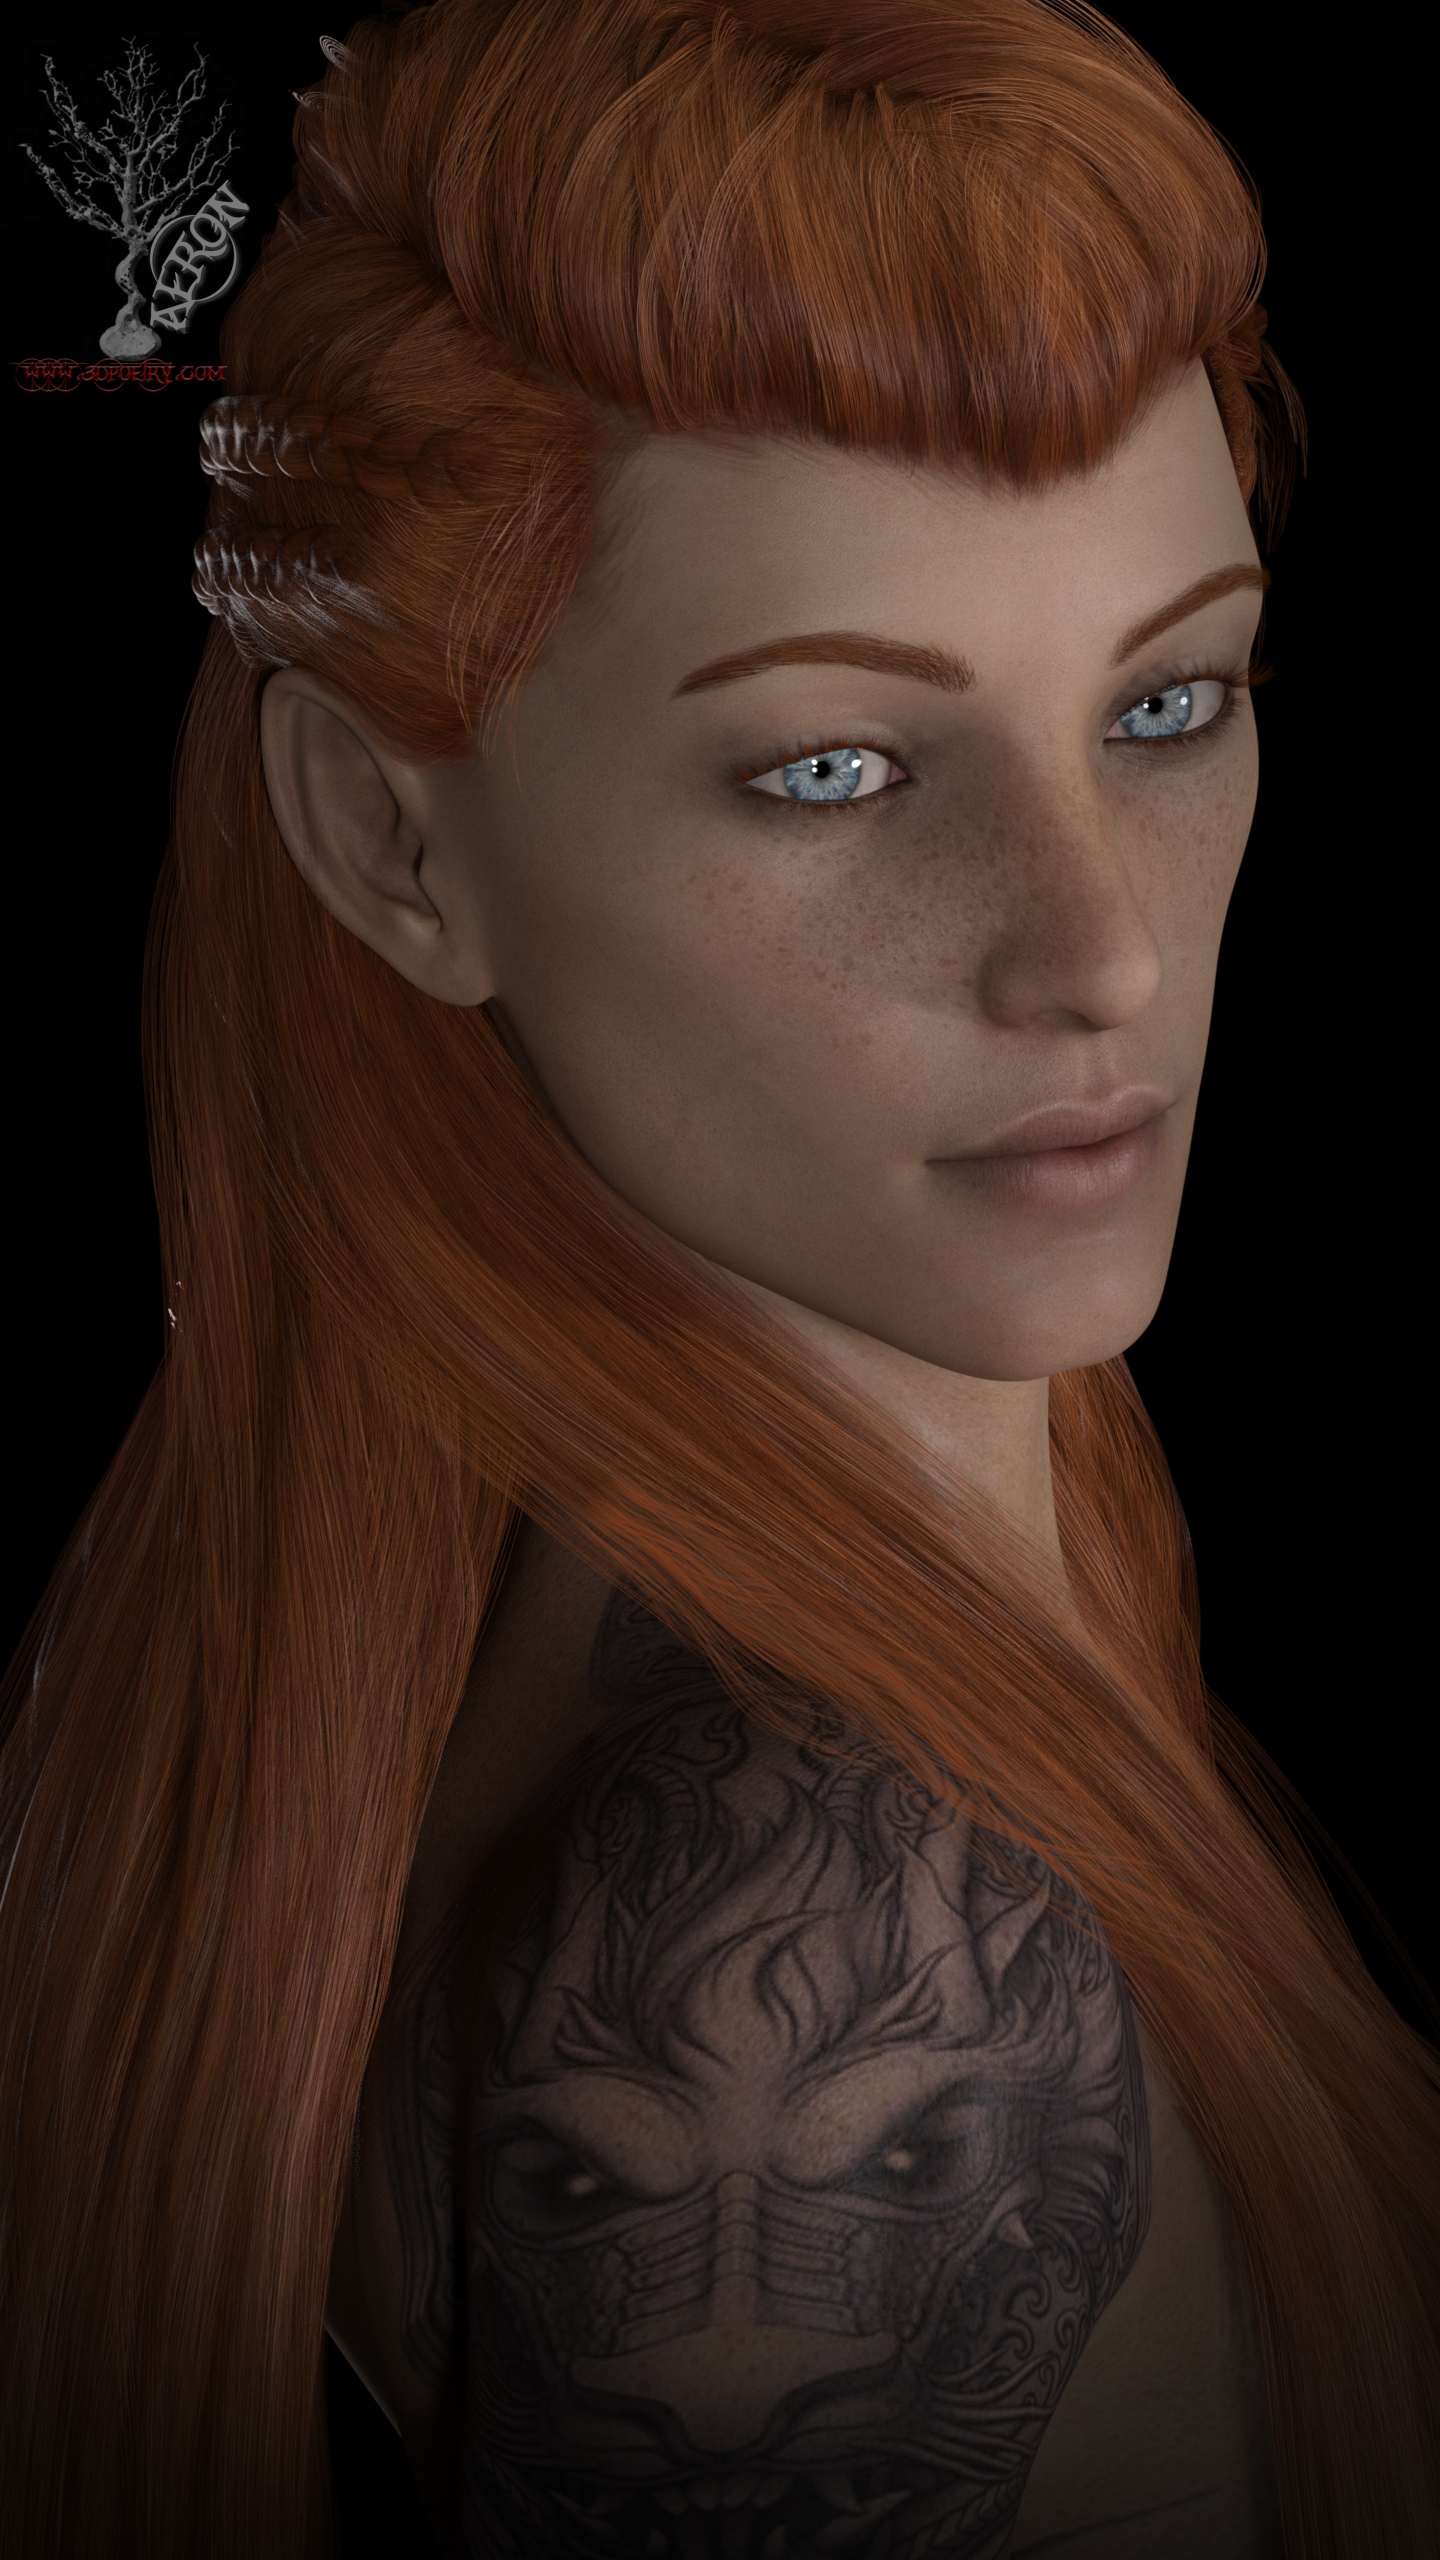 Working on a new character, no post work done, except softening the edges of the close up and a tuft of hair to cover up the break through on the shoulder, otherwise straight out of the render.